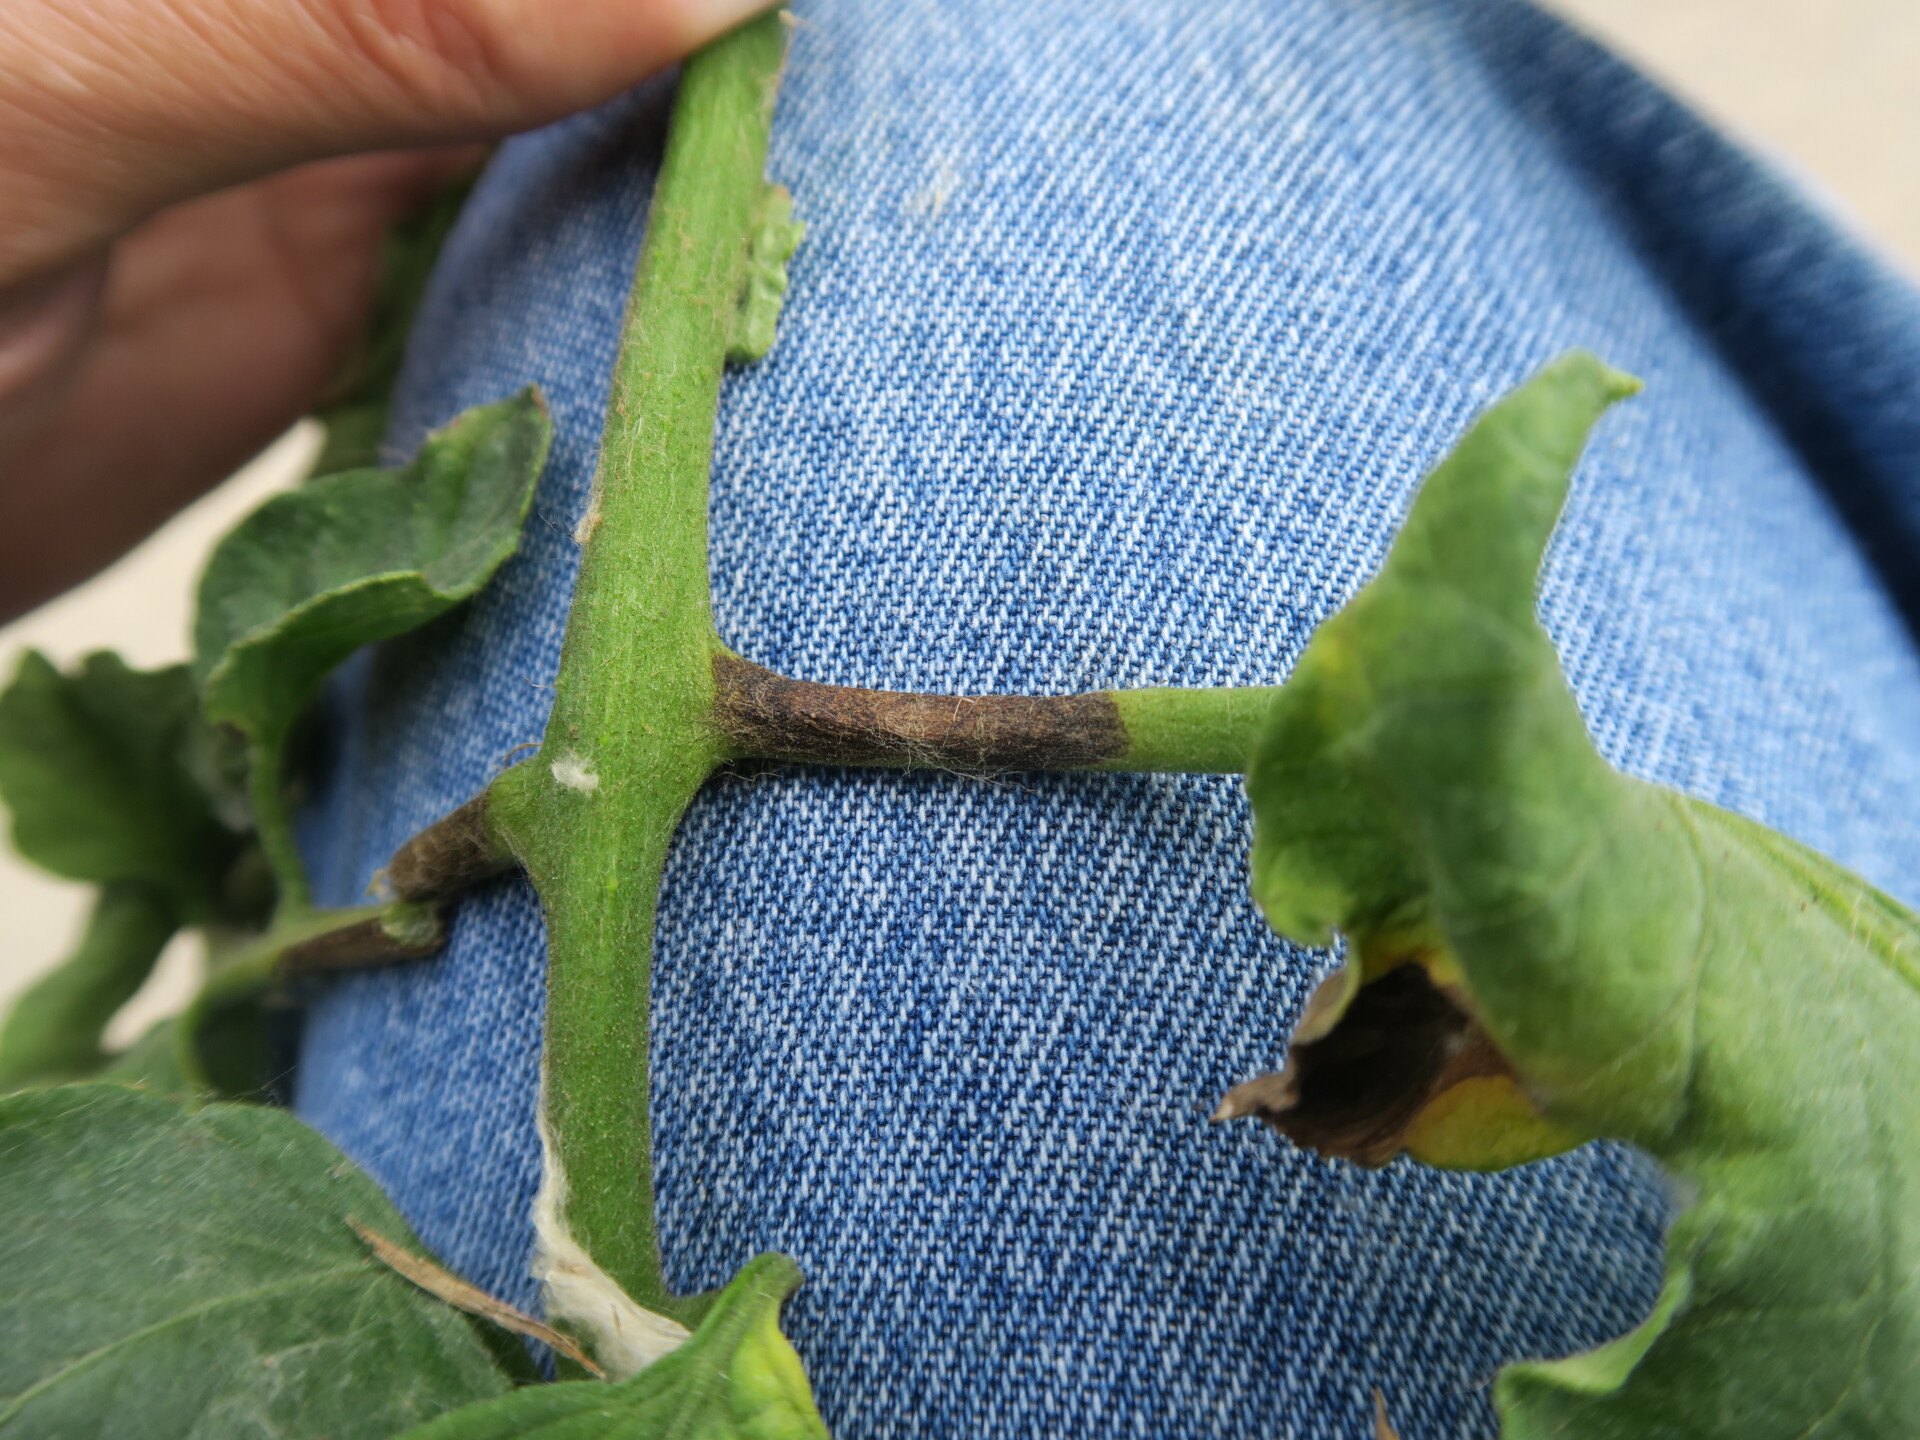 Petiole lesion of early blight of tomato.